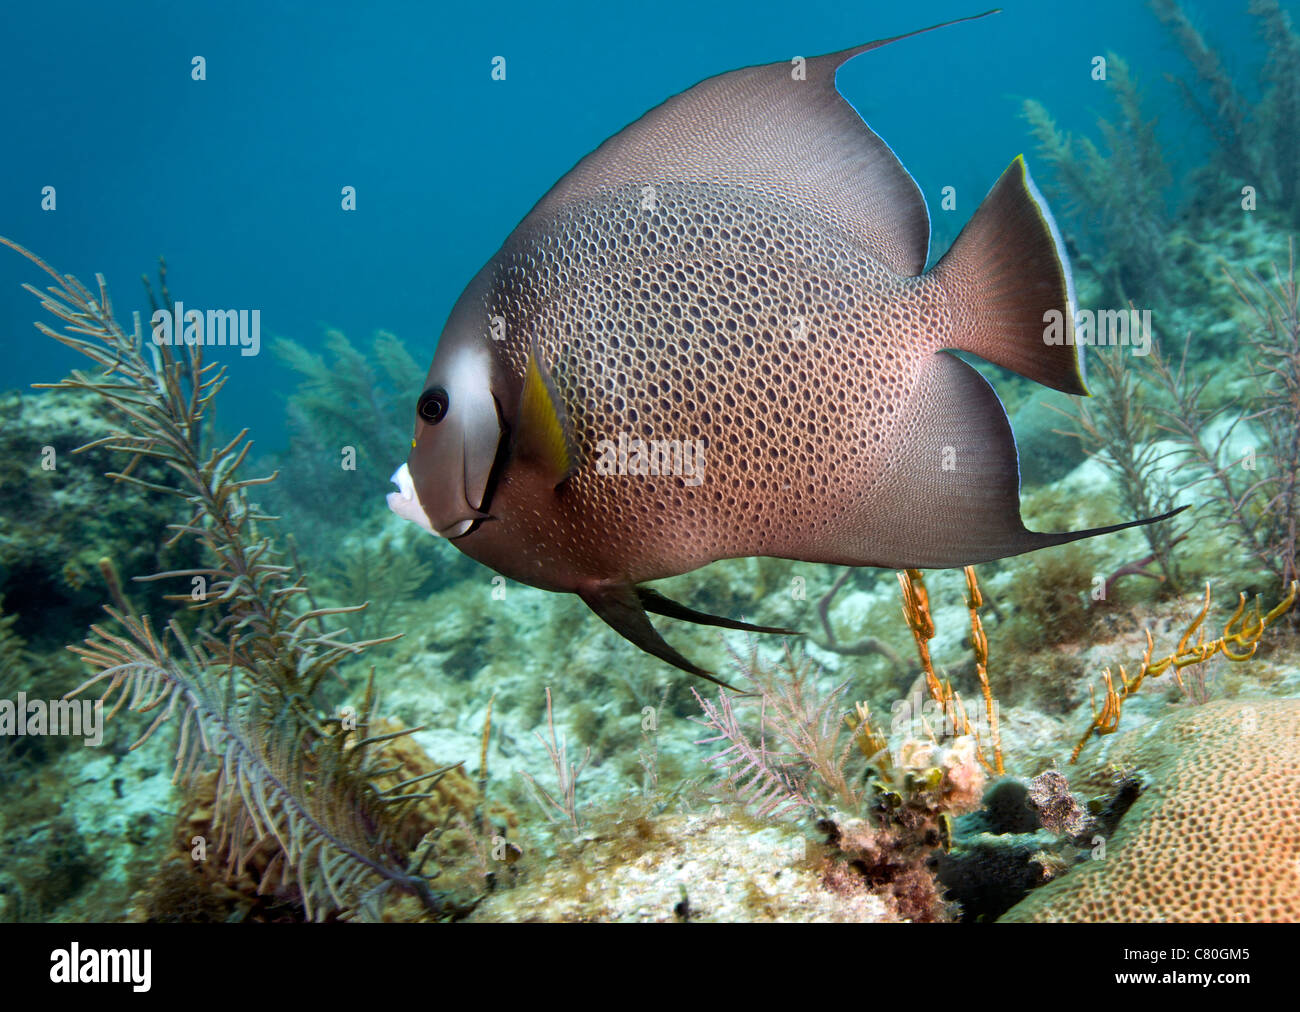 A Gray Angelfish in the shallow waters off the coast of Key Largo, Florida. Stock Photo